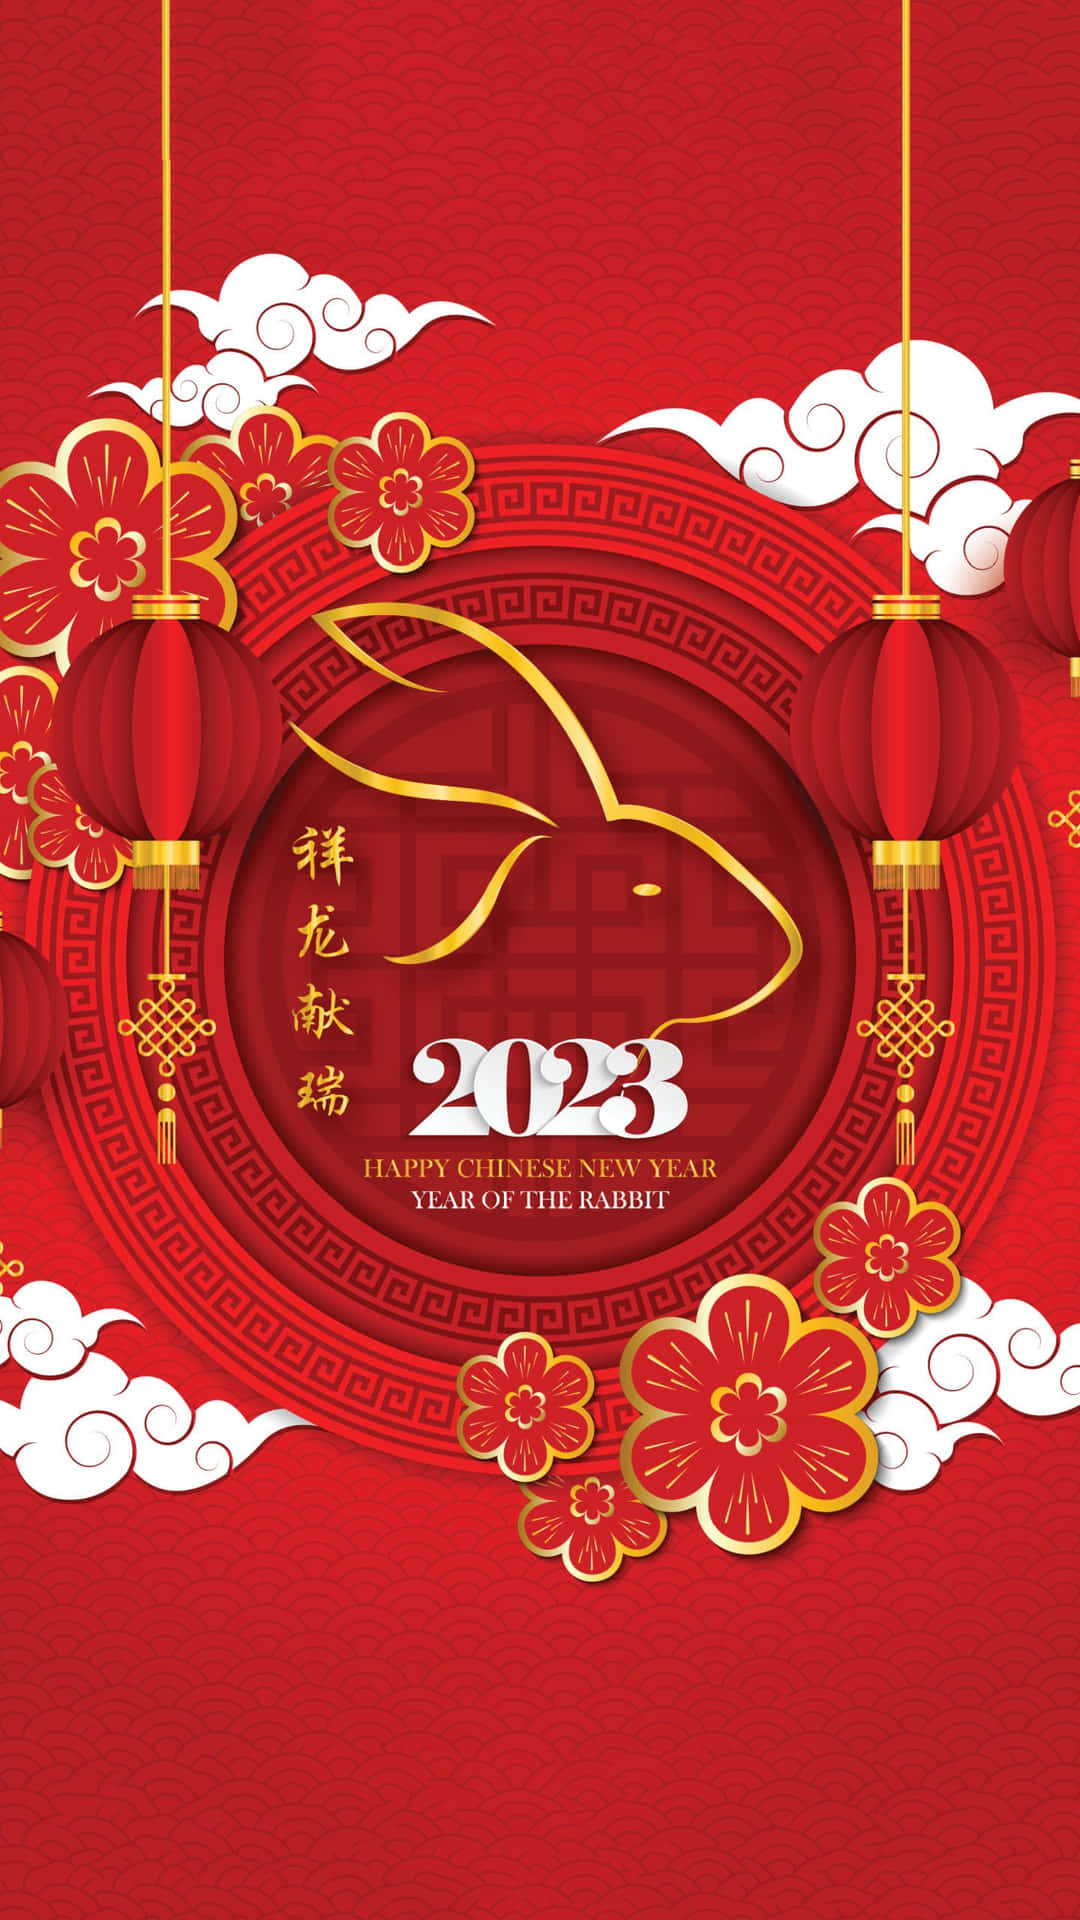 Chinese New Year 2023 Iphone Wallpaper